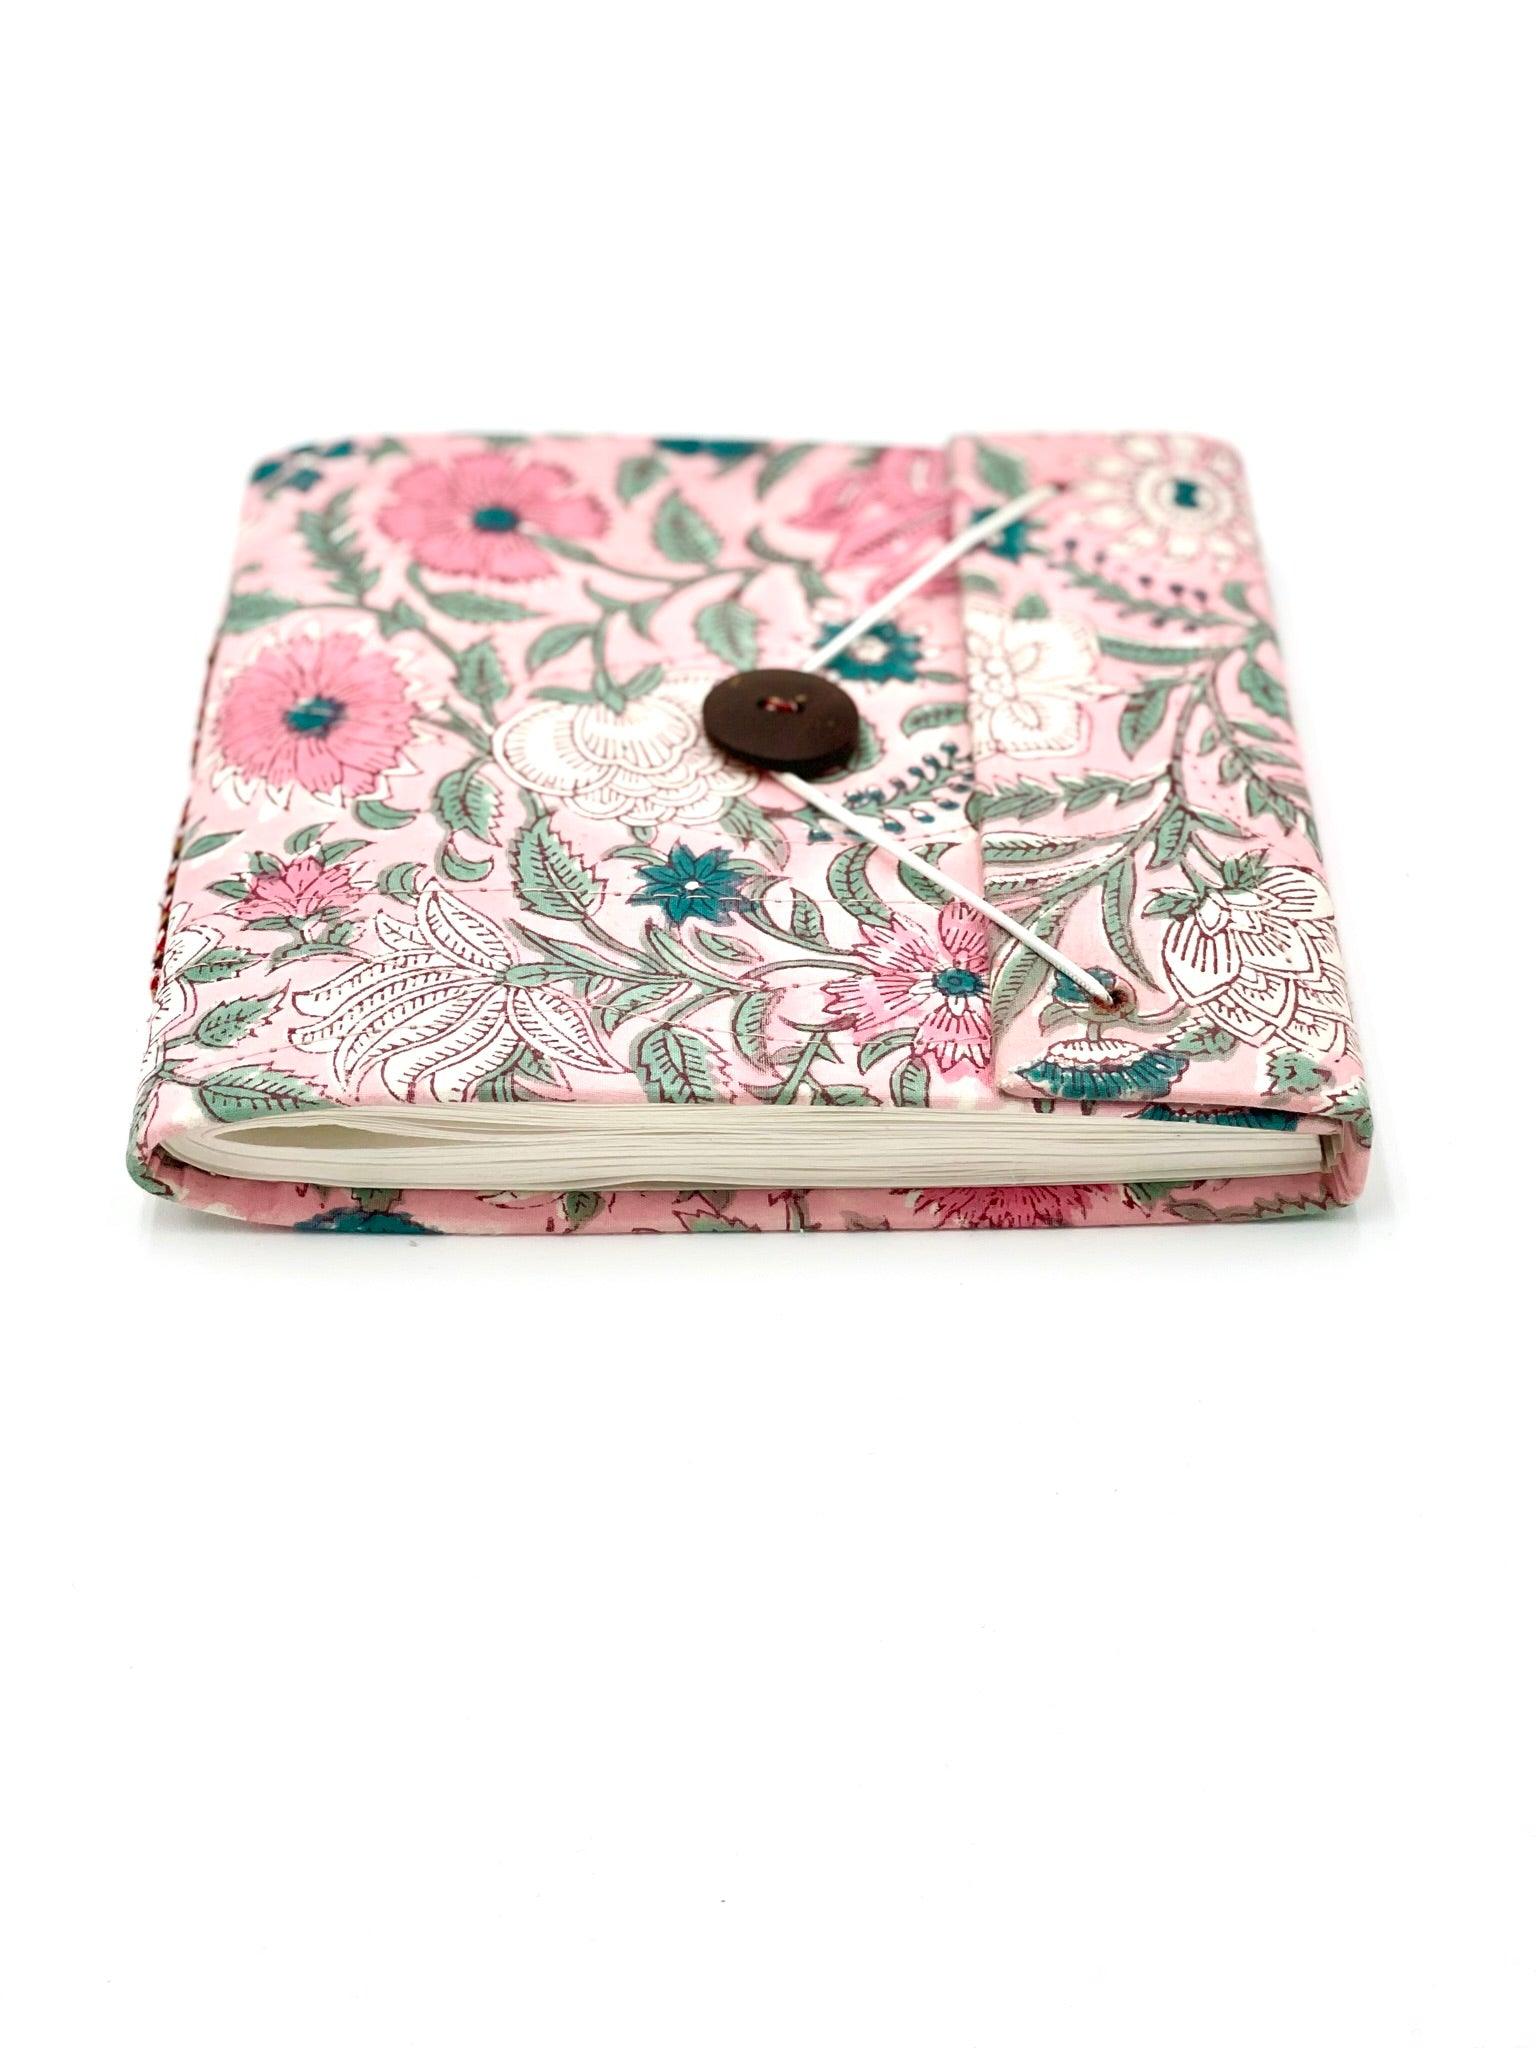 Block Print Journal/Notebook, Pink Floral - Unlined, 100 Pages, Thick Paper, Hard Cover - Transcend